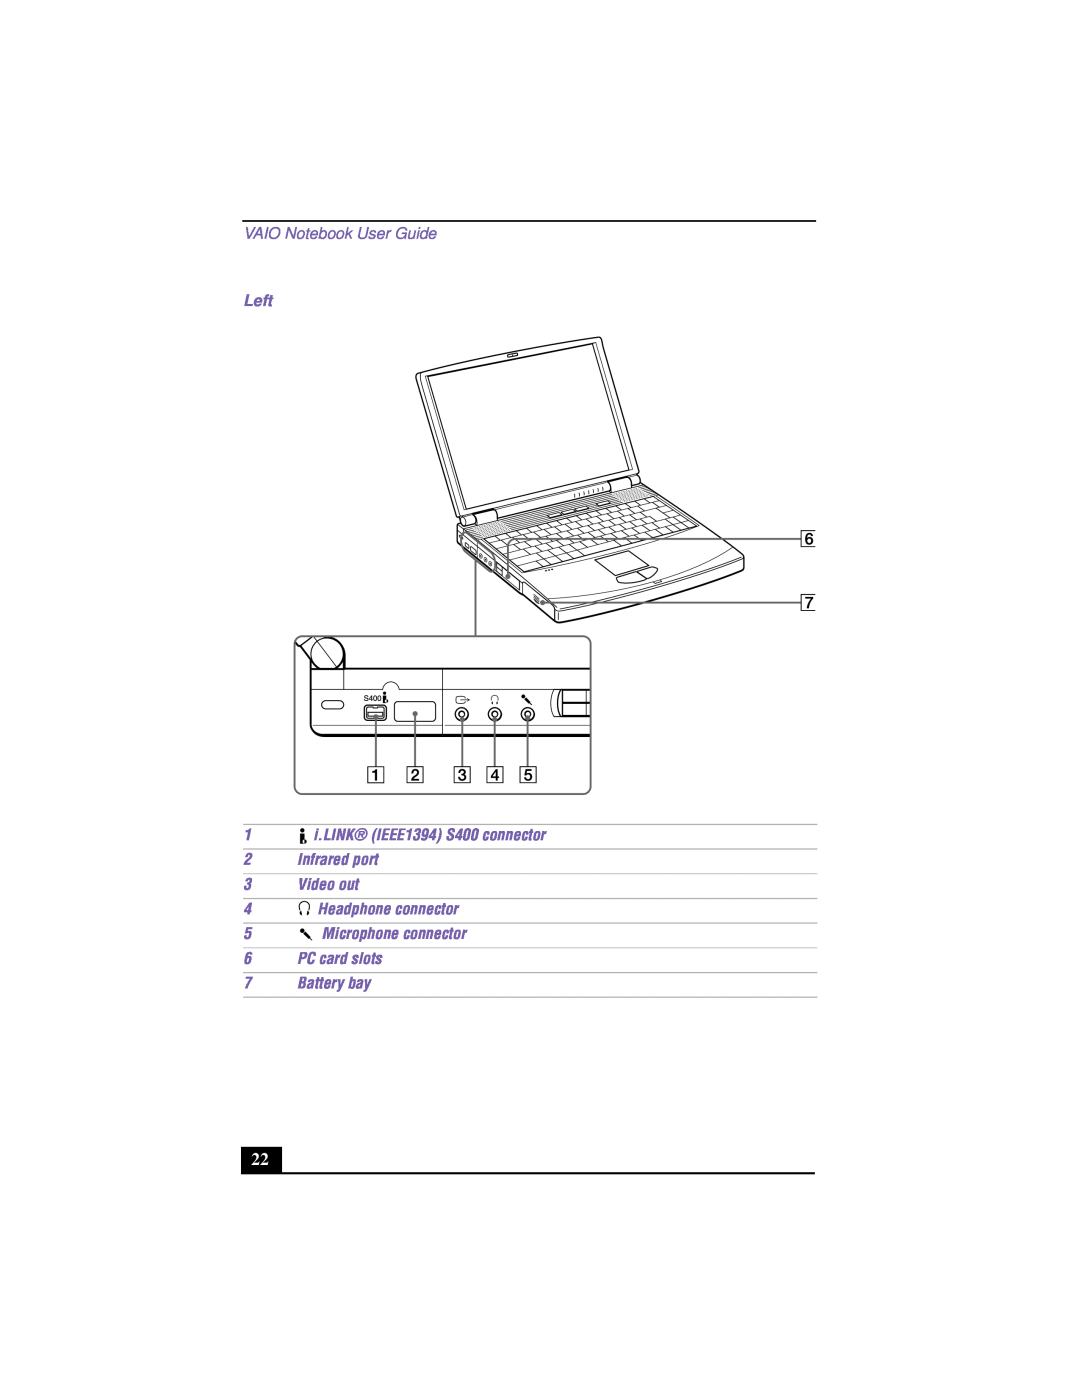 Sony PCG-F640 VAIO Notebook User Guide, Left 1 i.LINK IEEE1394 S400 connector 2 Infrared port 3 Video out, Battery bay 